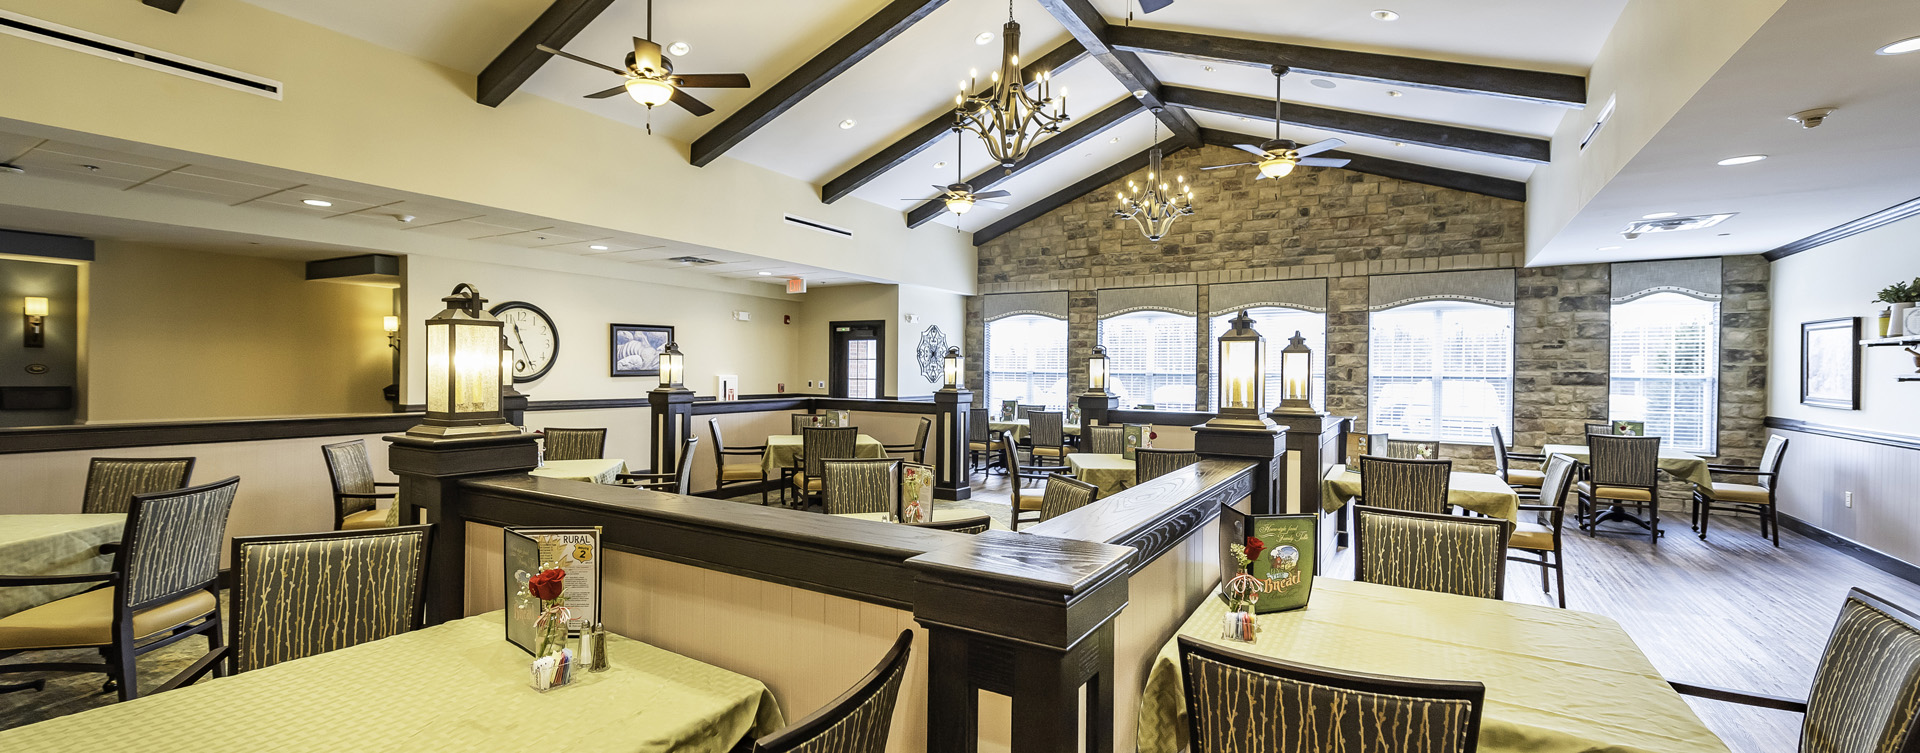 Enjoy restaurant -style meals served three times a day in our dining room at Bickford of Canton